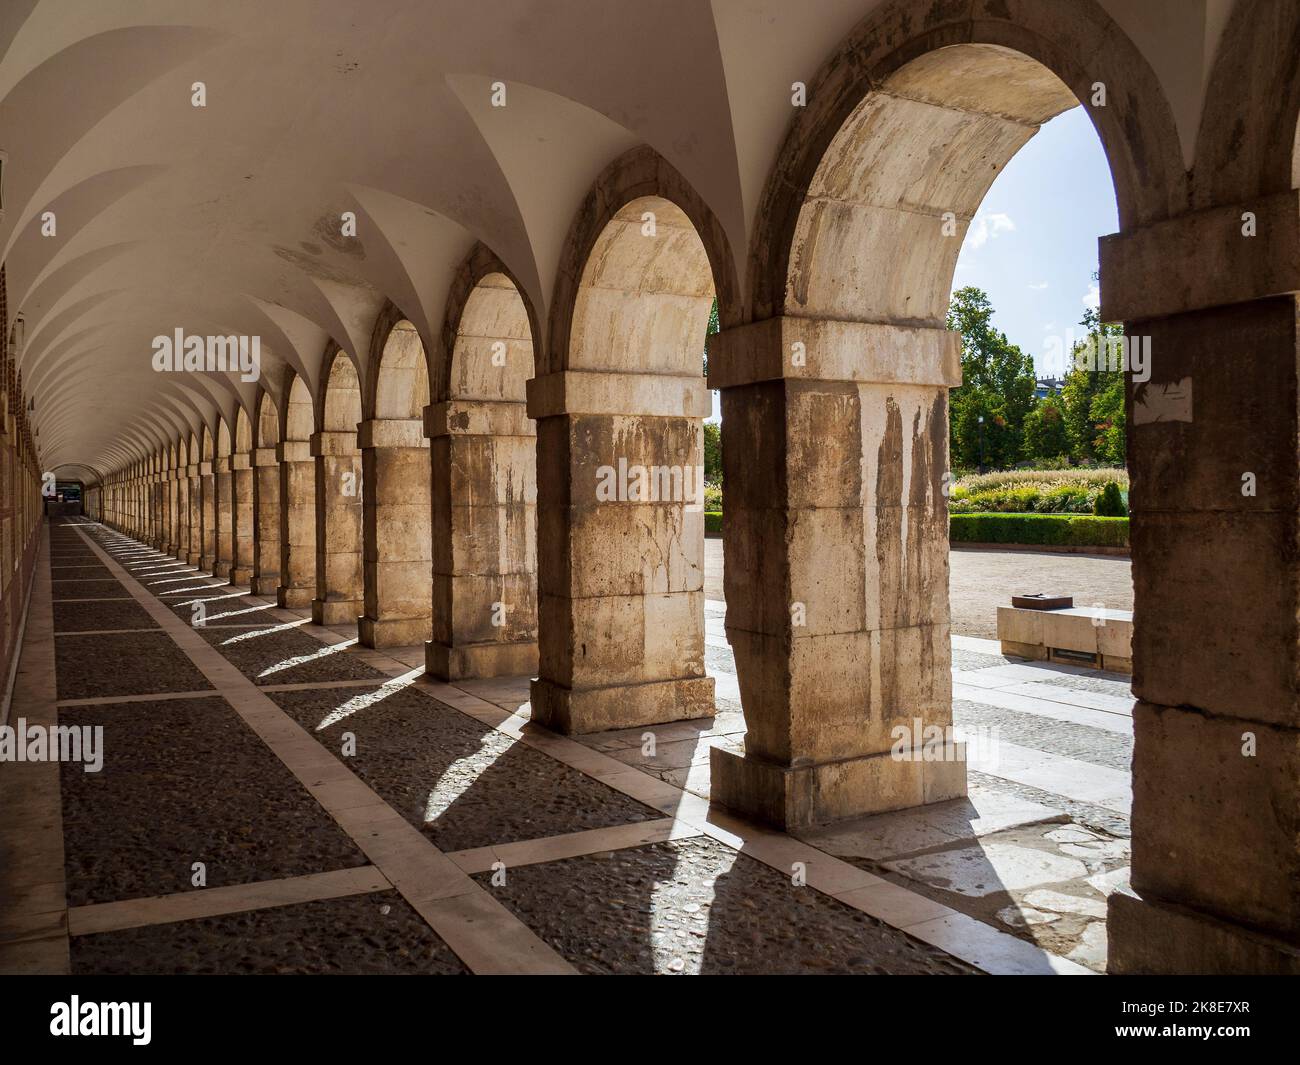 Stone arches in the corridors of the palace of Aranjuez Stock Photo